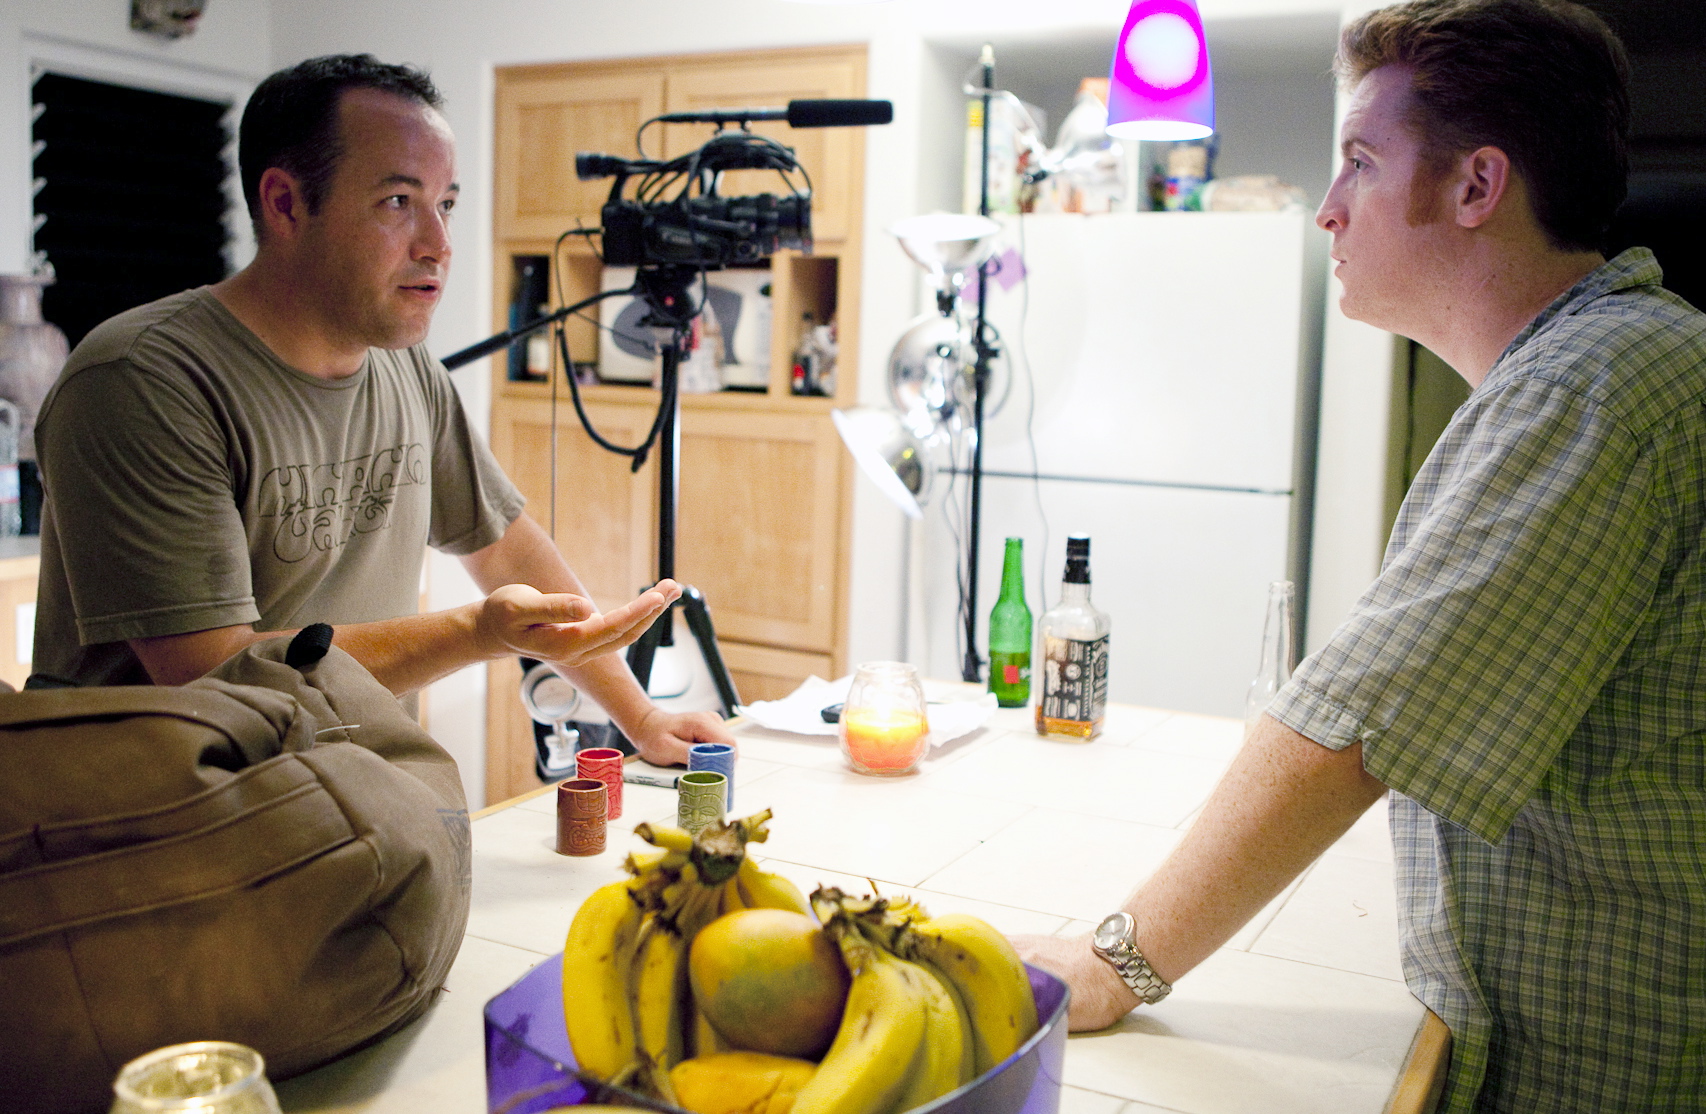 Derek Frey (left) and Edward Mount (right) on the set of 